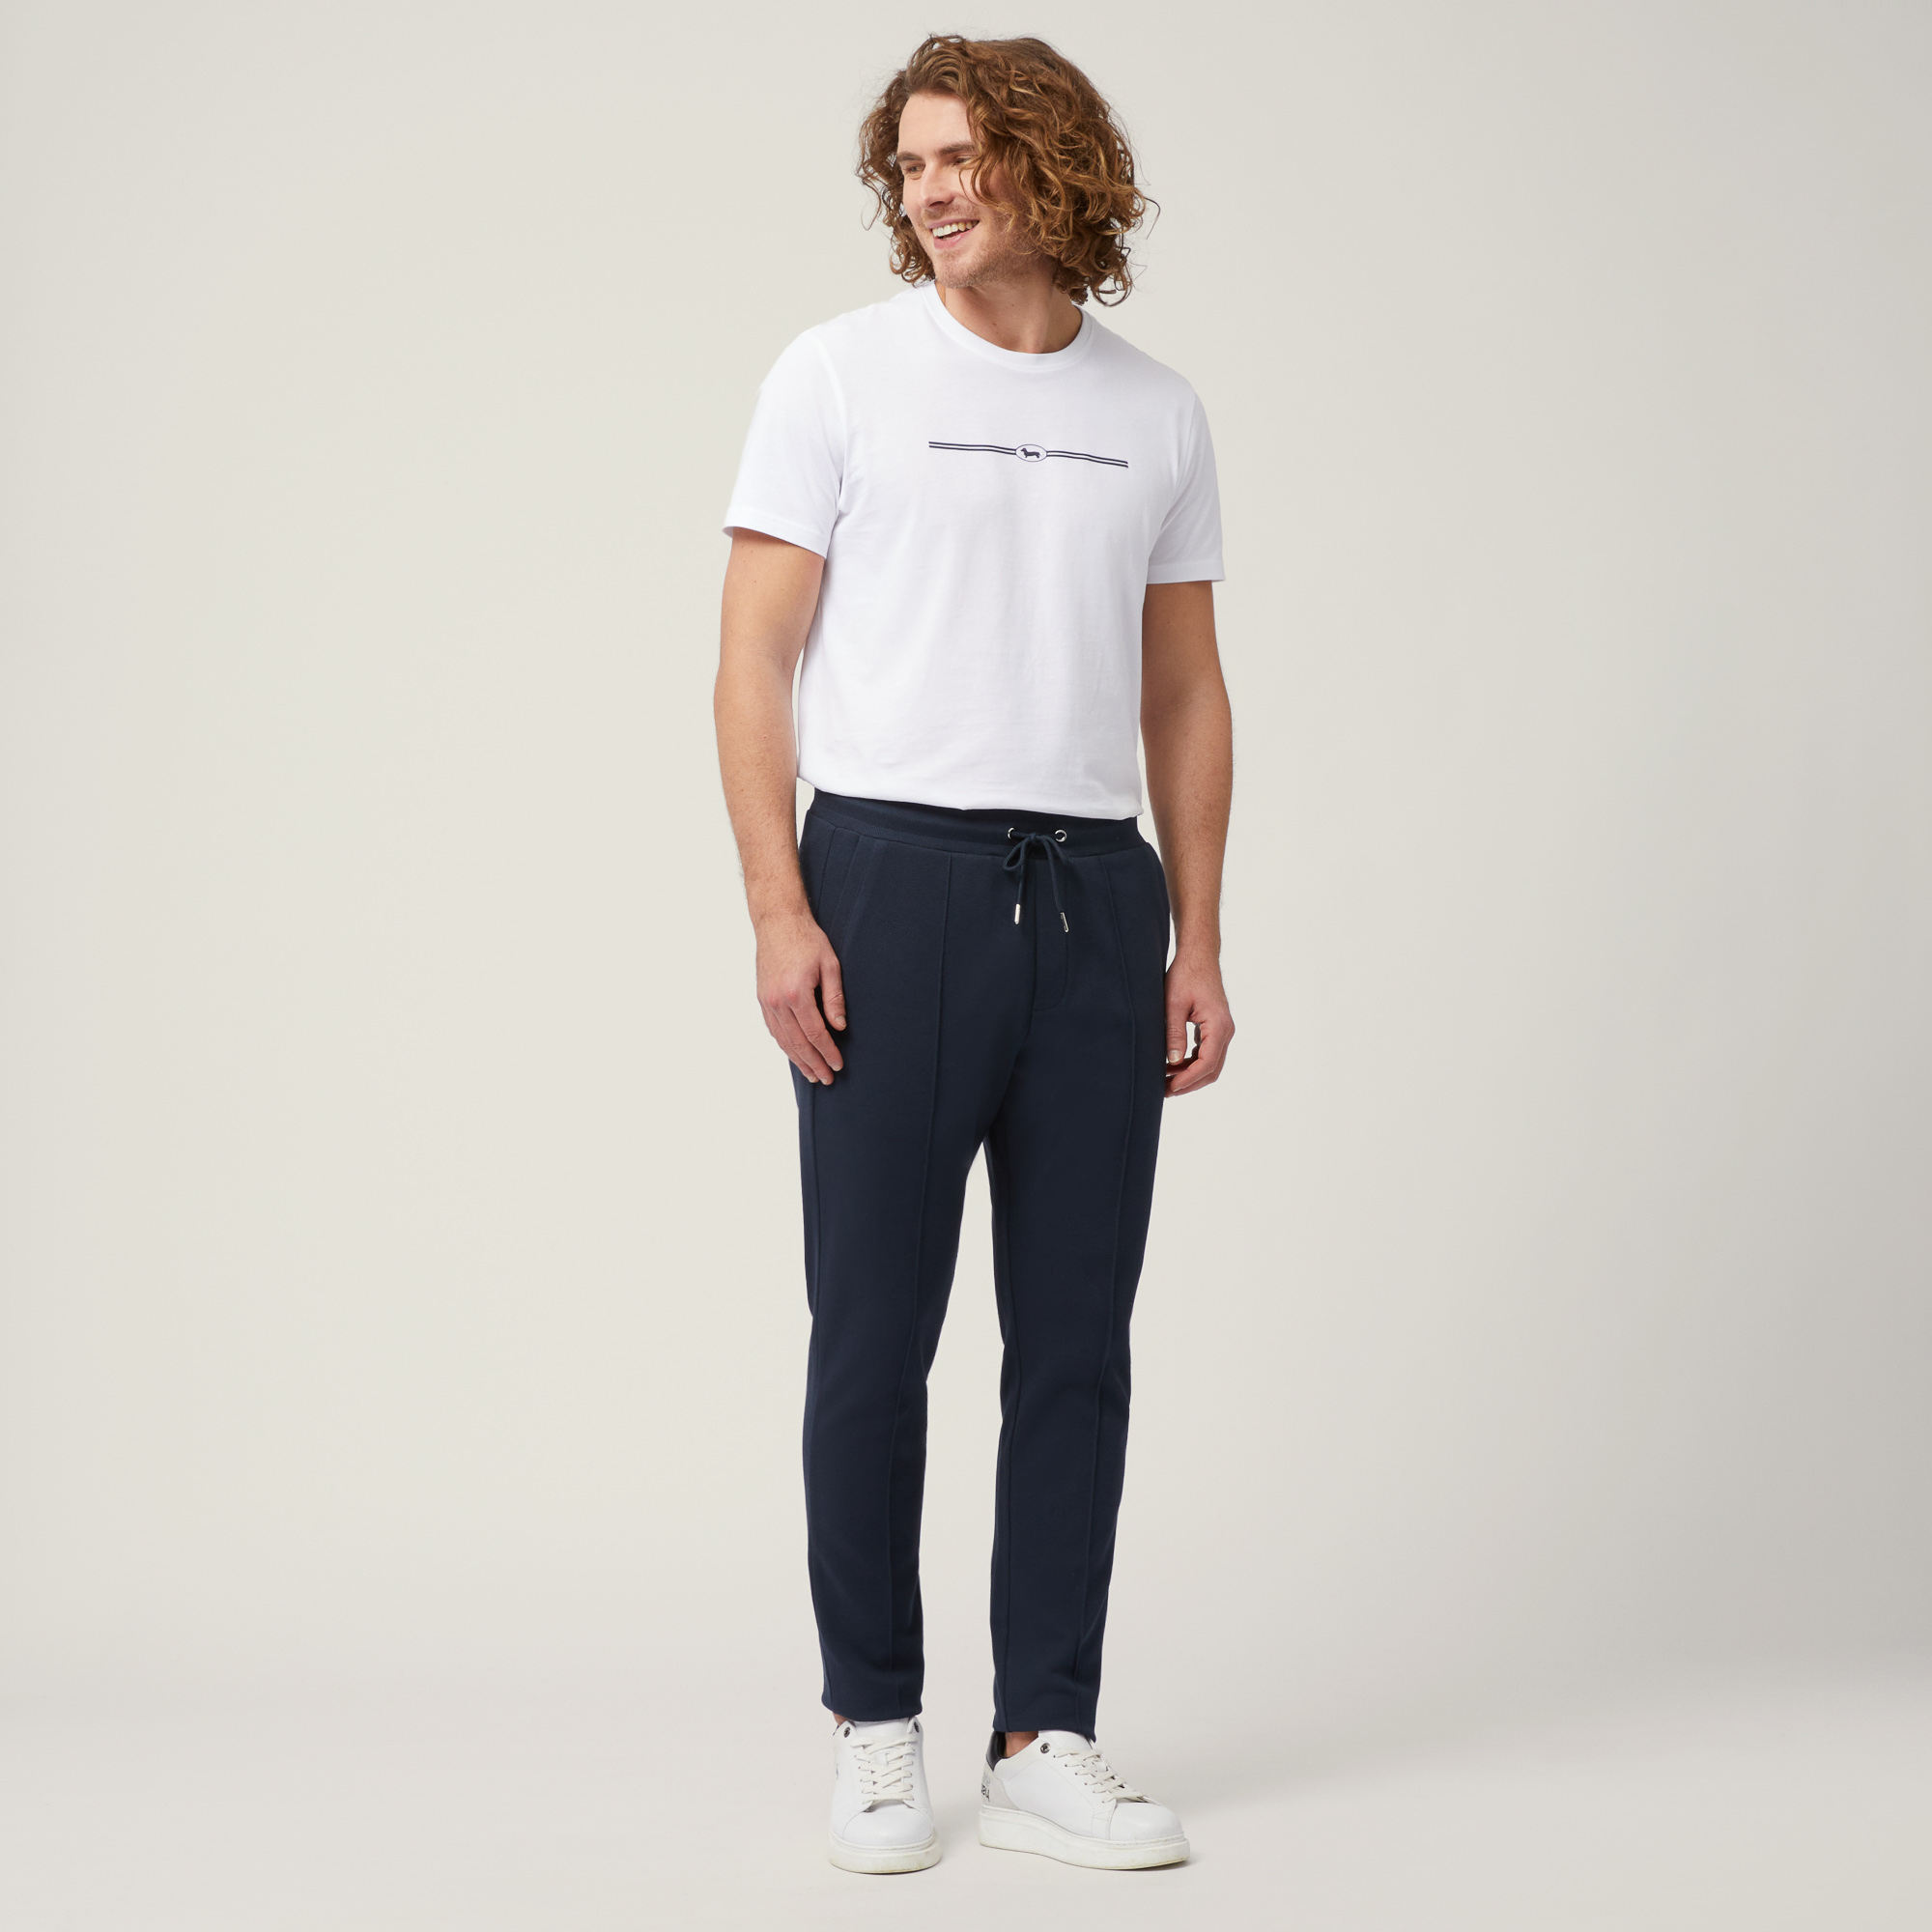 Pantalone In Cotone Stretch Con Tasca Posteriore, Blu Navy, large image number 3